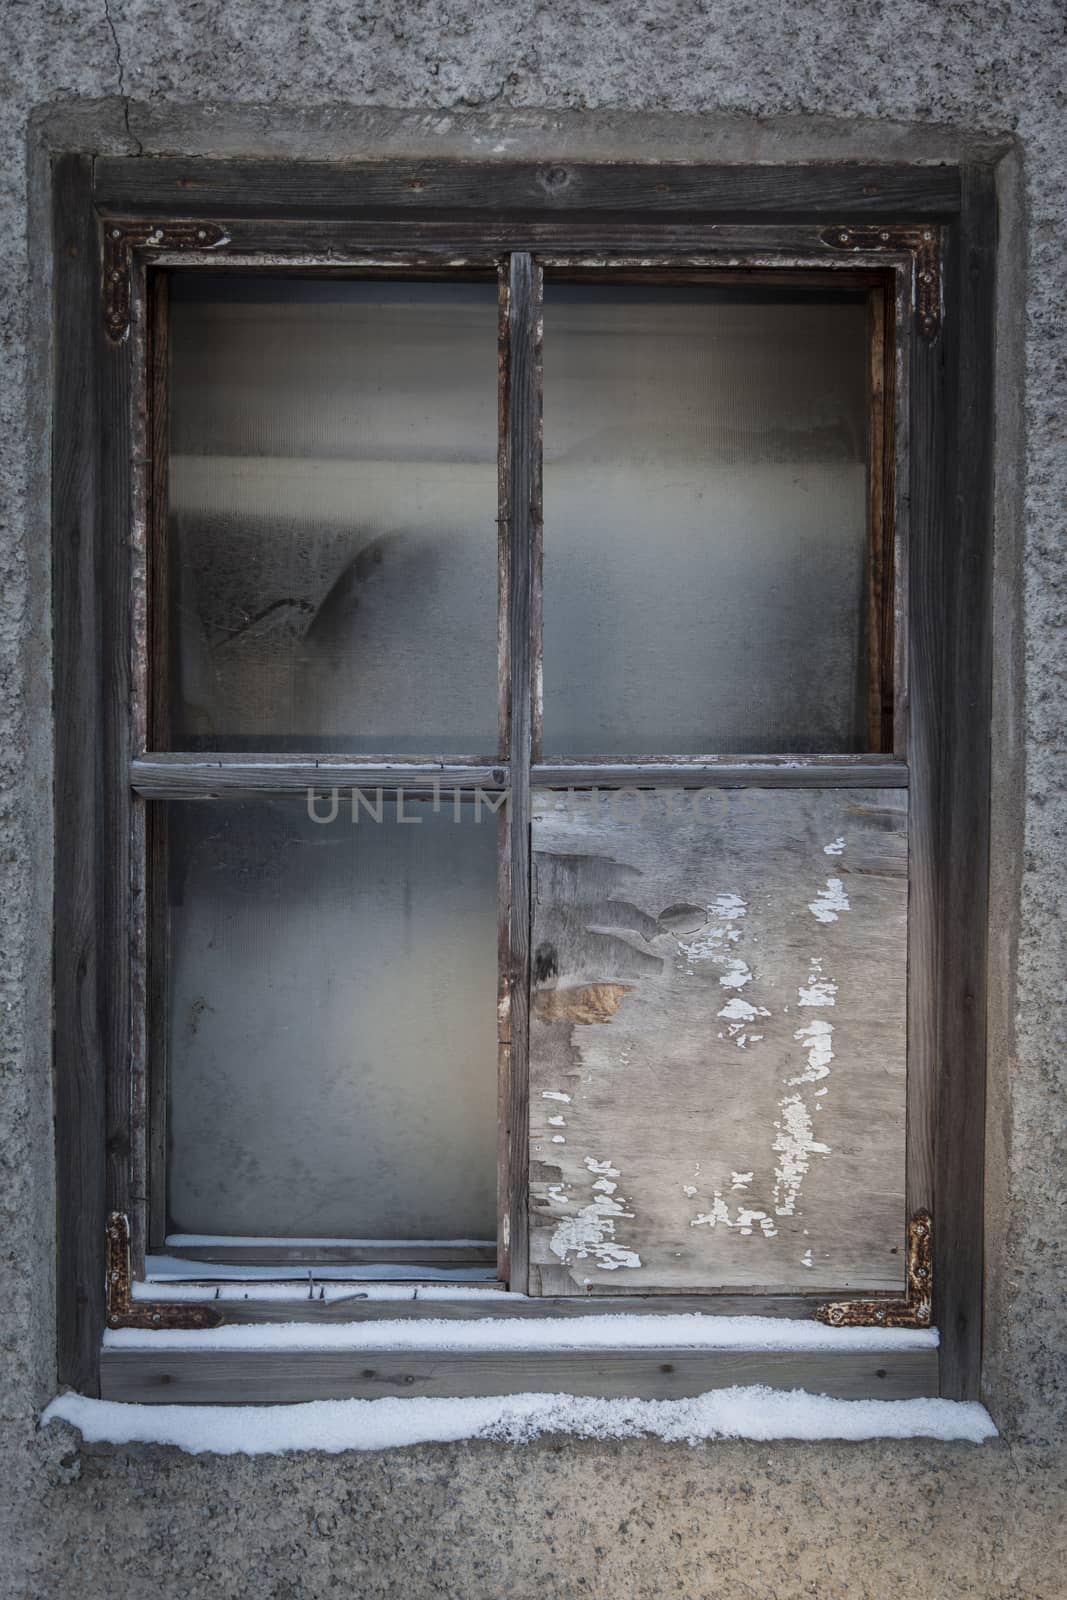 An old window with a single frame broken.